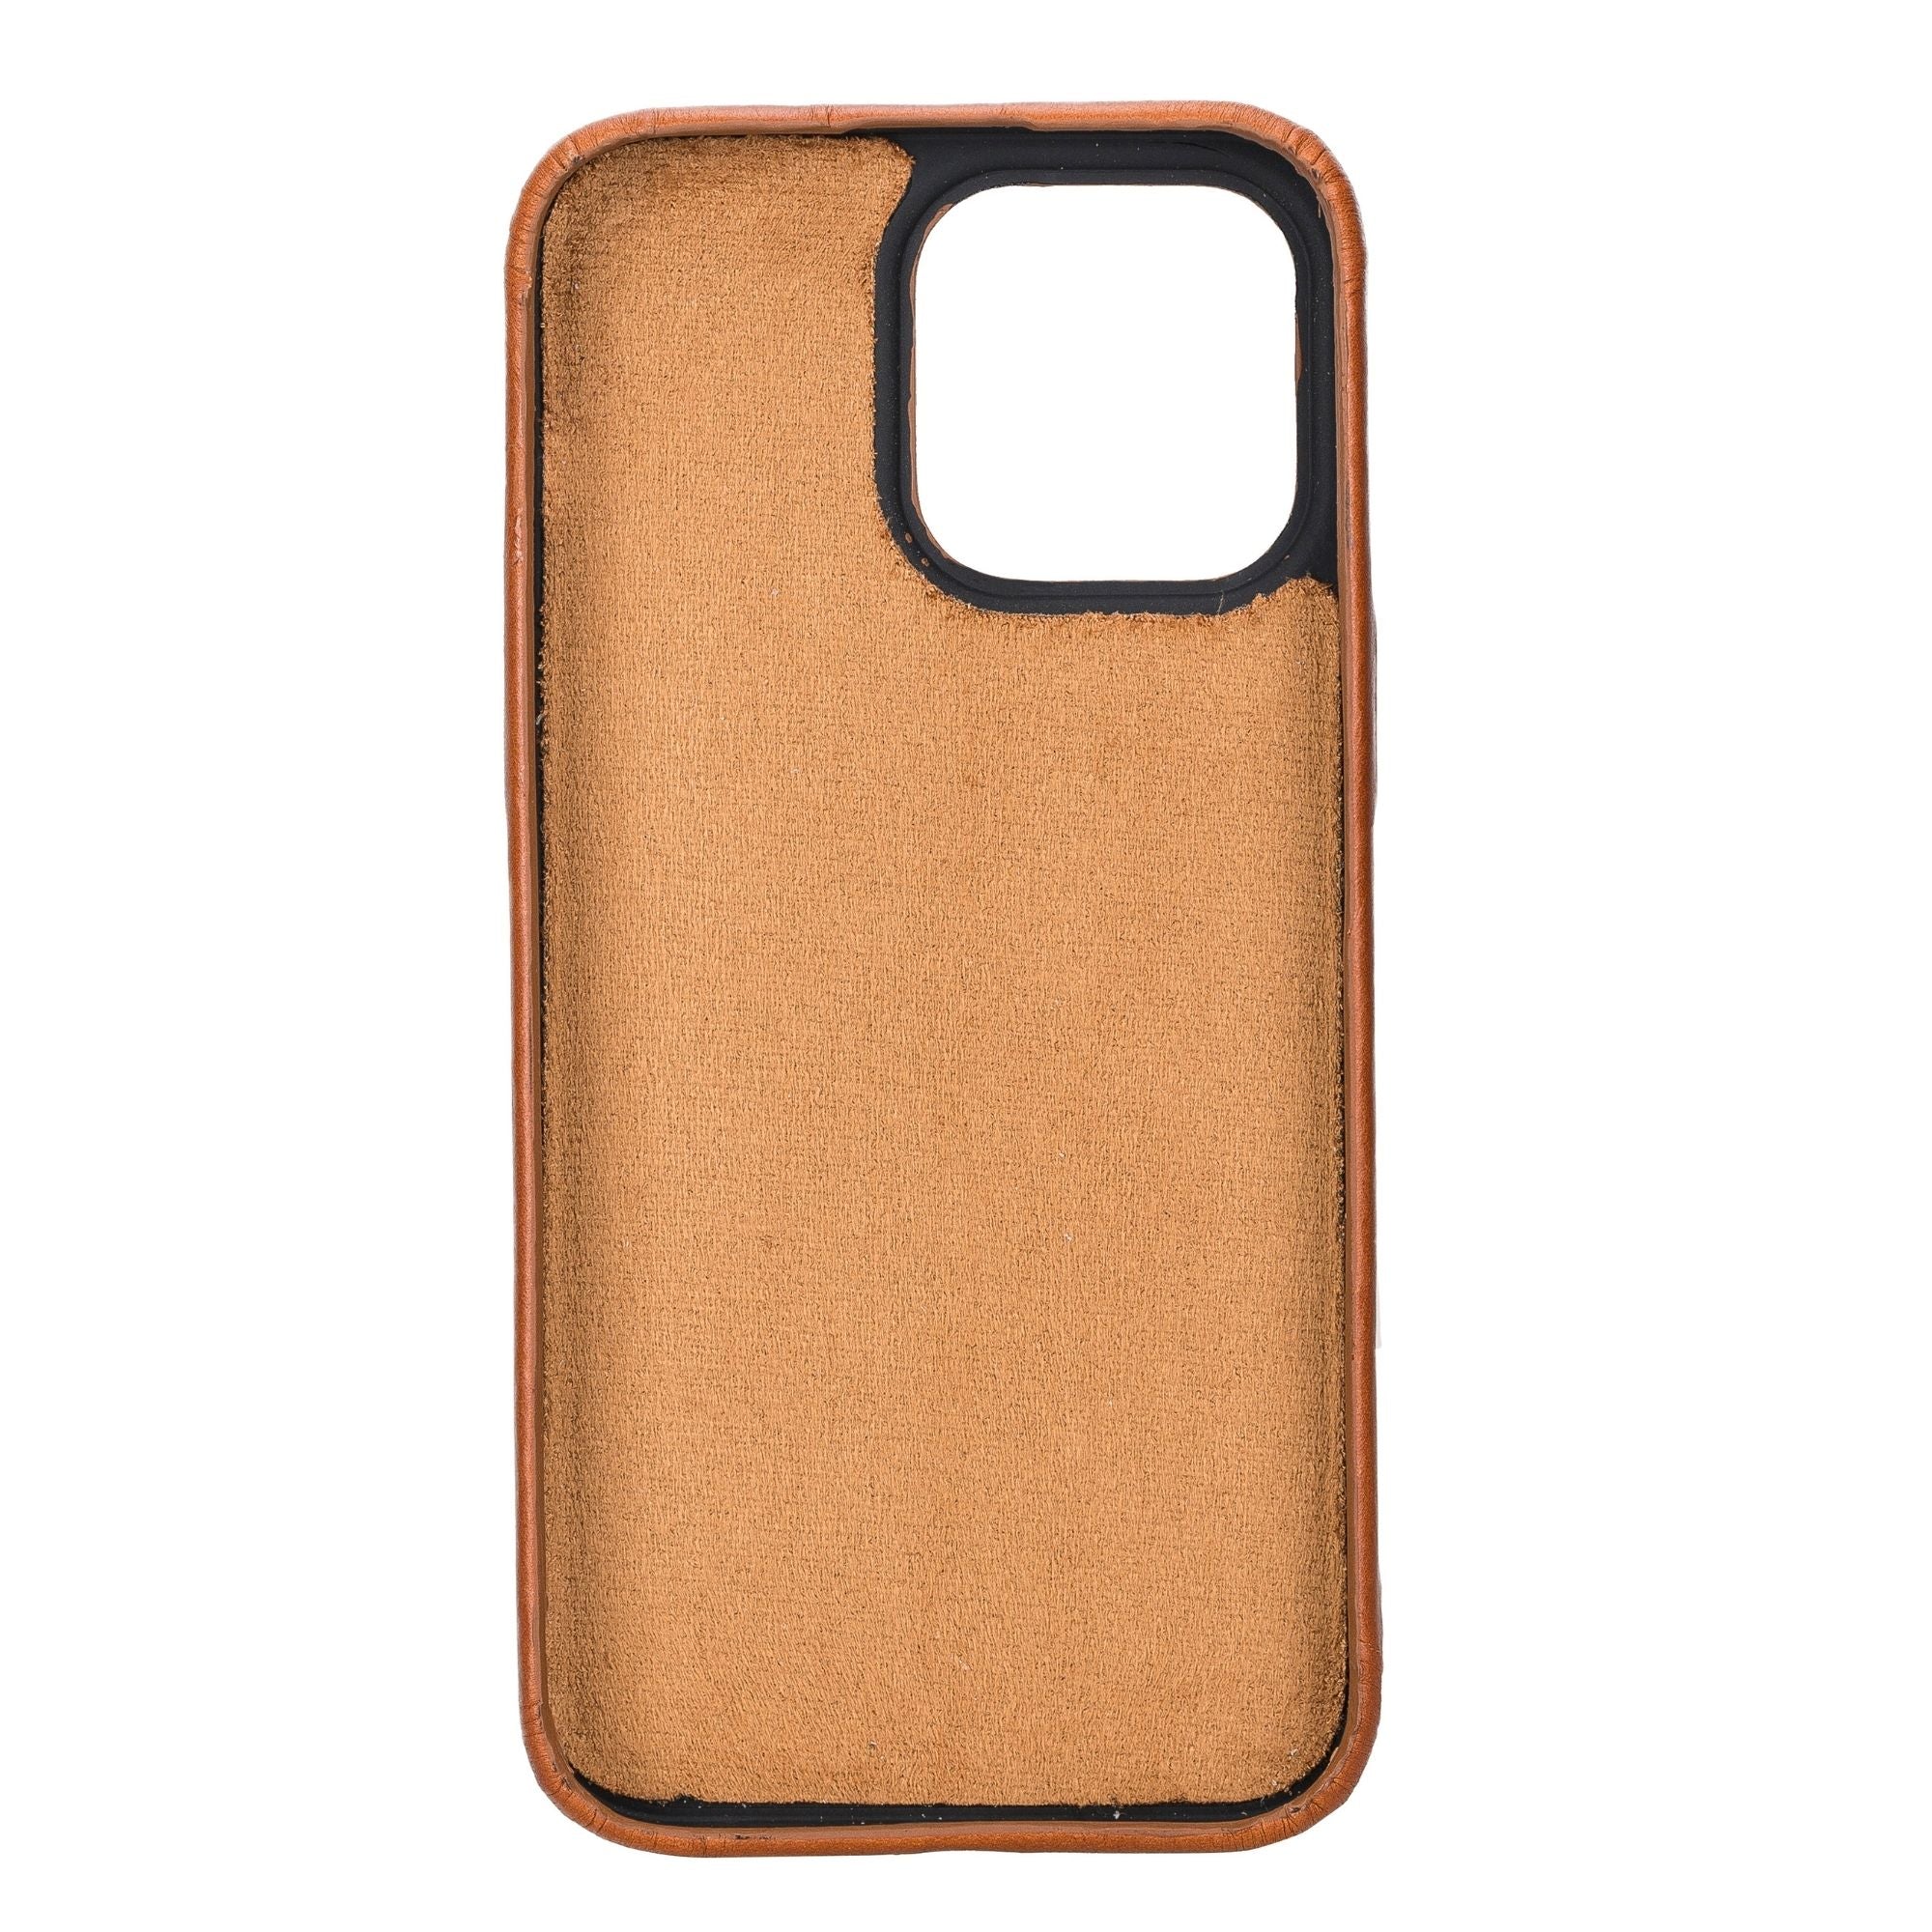 Pinedale Leather Snap-on Case for iPhone 11 Series - iPhone 11 Pro Max - Tan - TORONATA